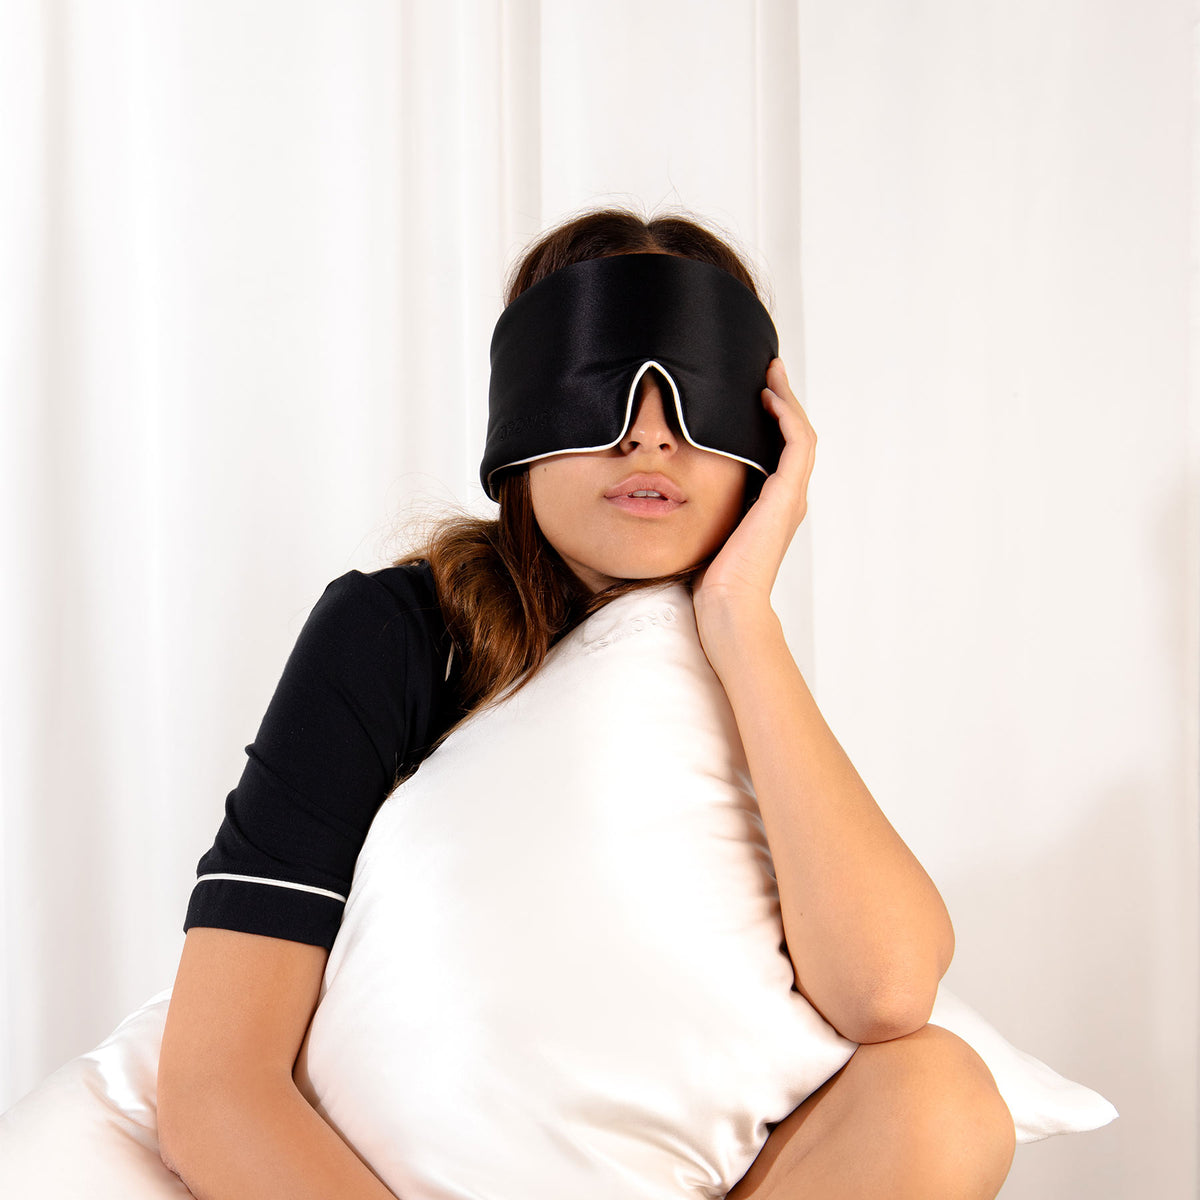 Model with black Drowsy sleep mask covering eyes hugging a white silk pillow with a white silk backdrop